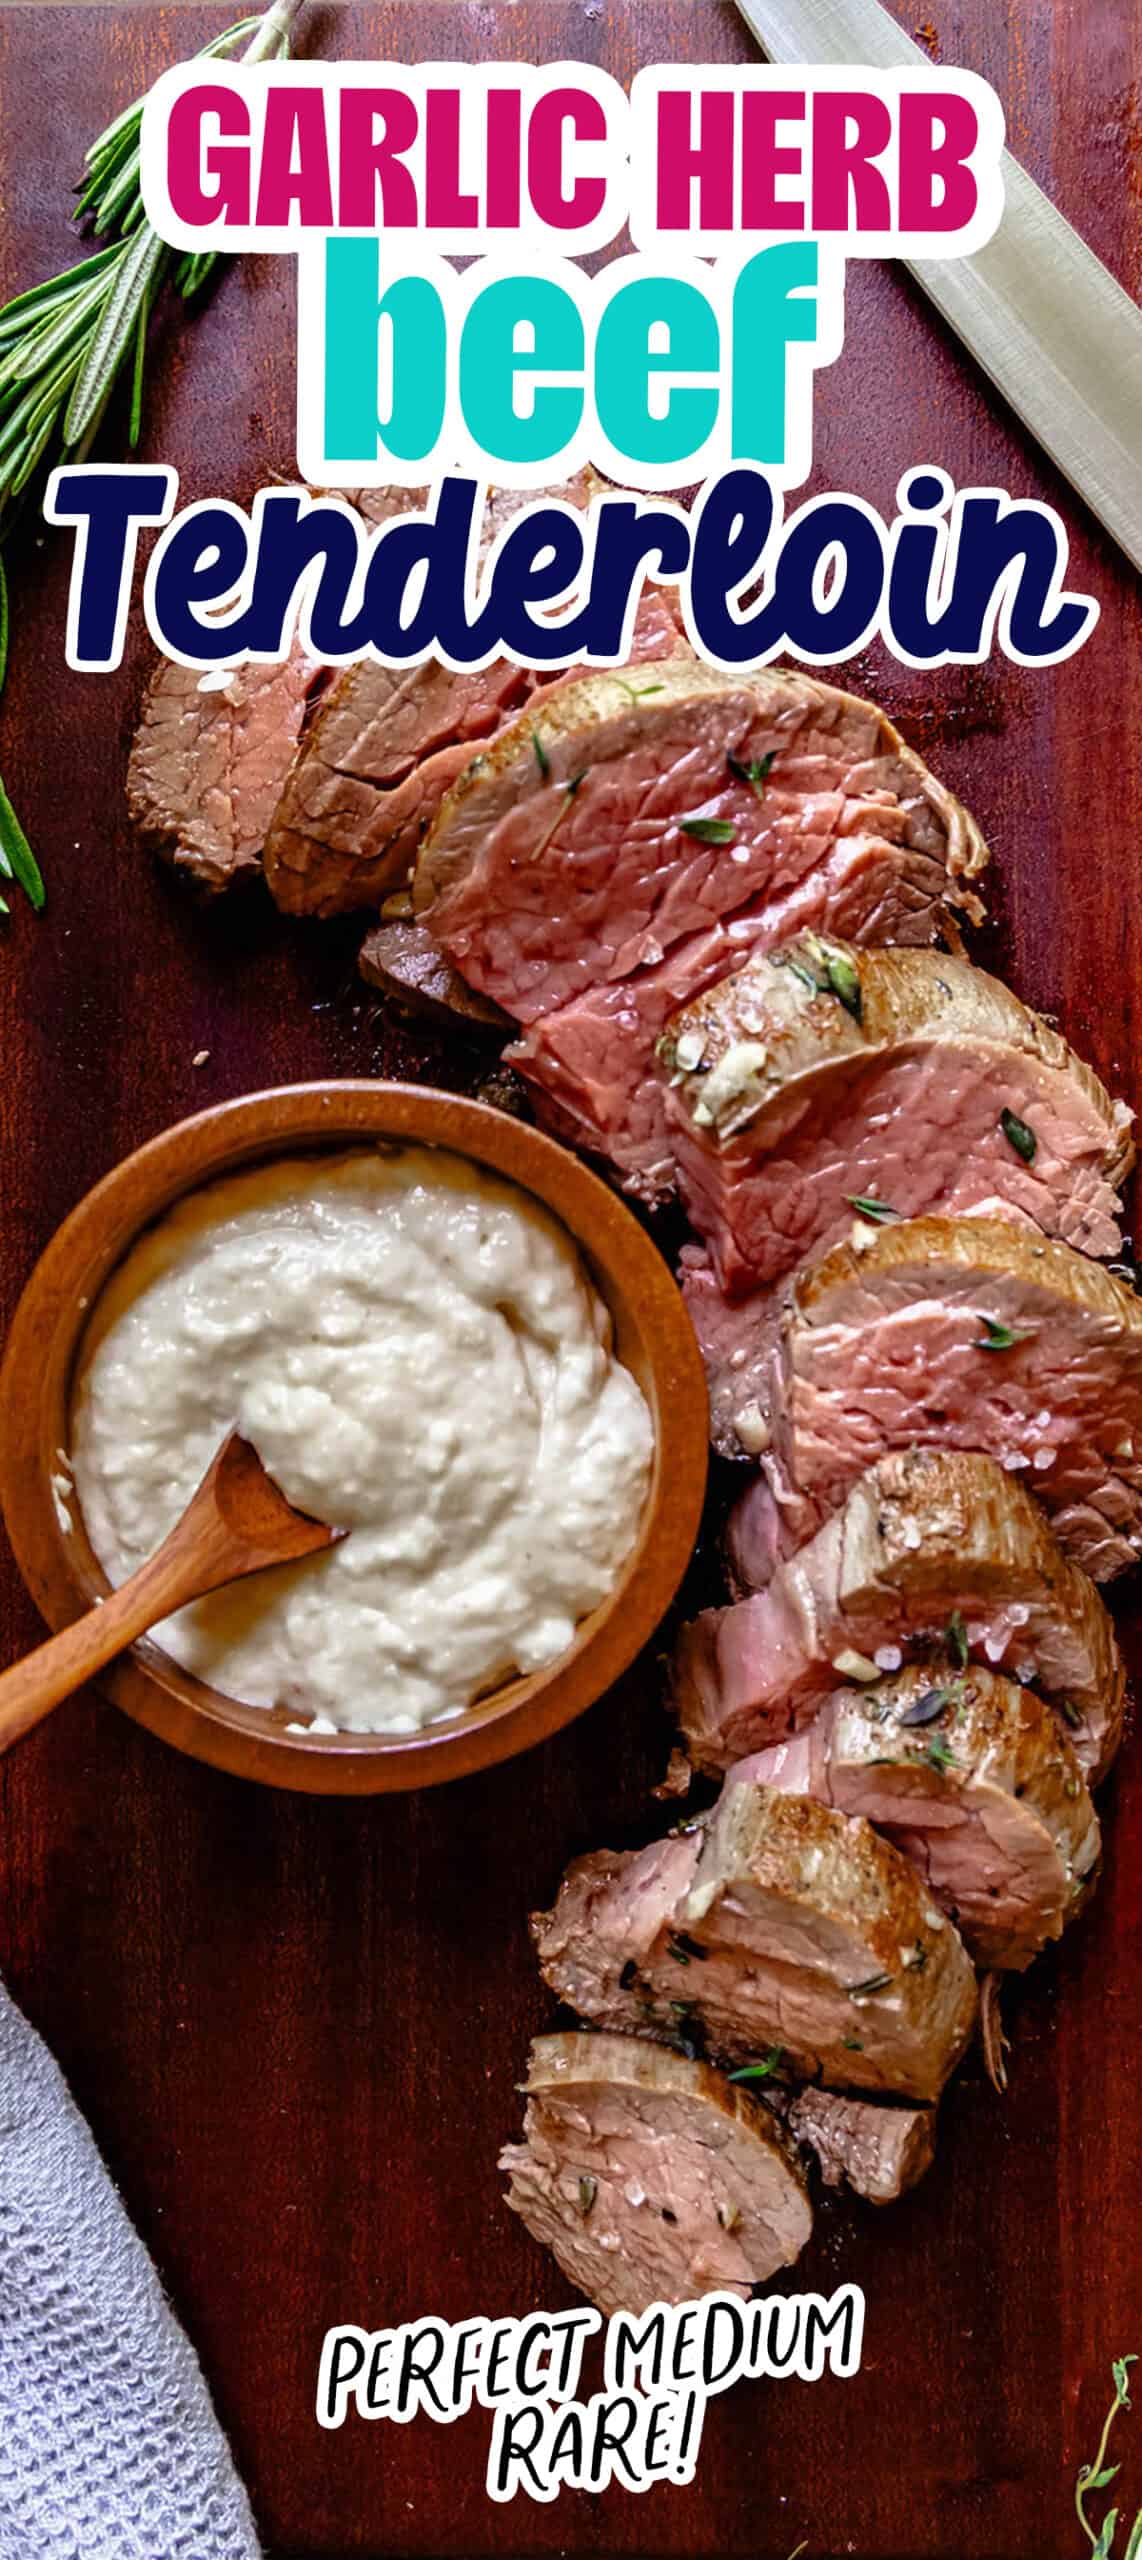 Garlic herb beef tenderloin is a delectable dish that combines the flavors of garlic and herbs with succulent beef tenderloin.